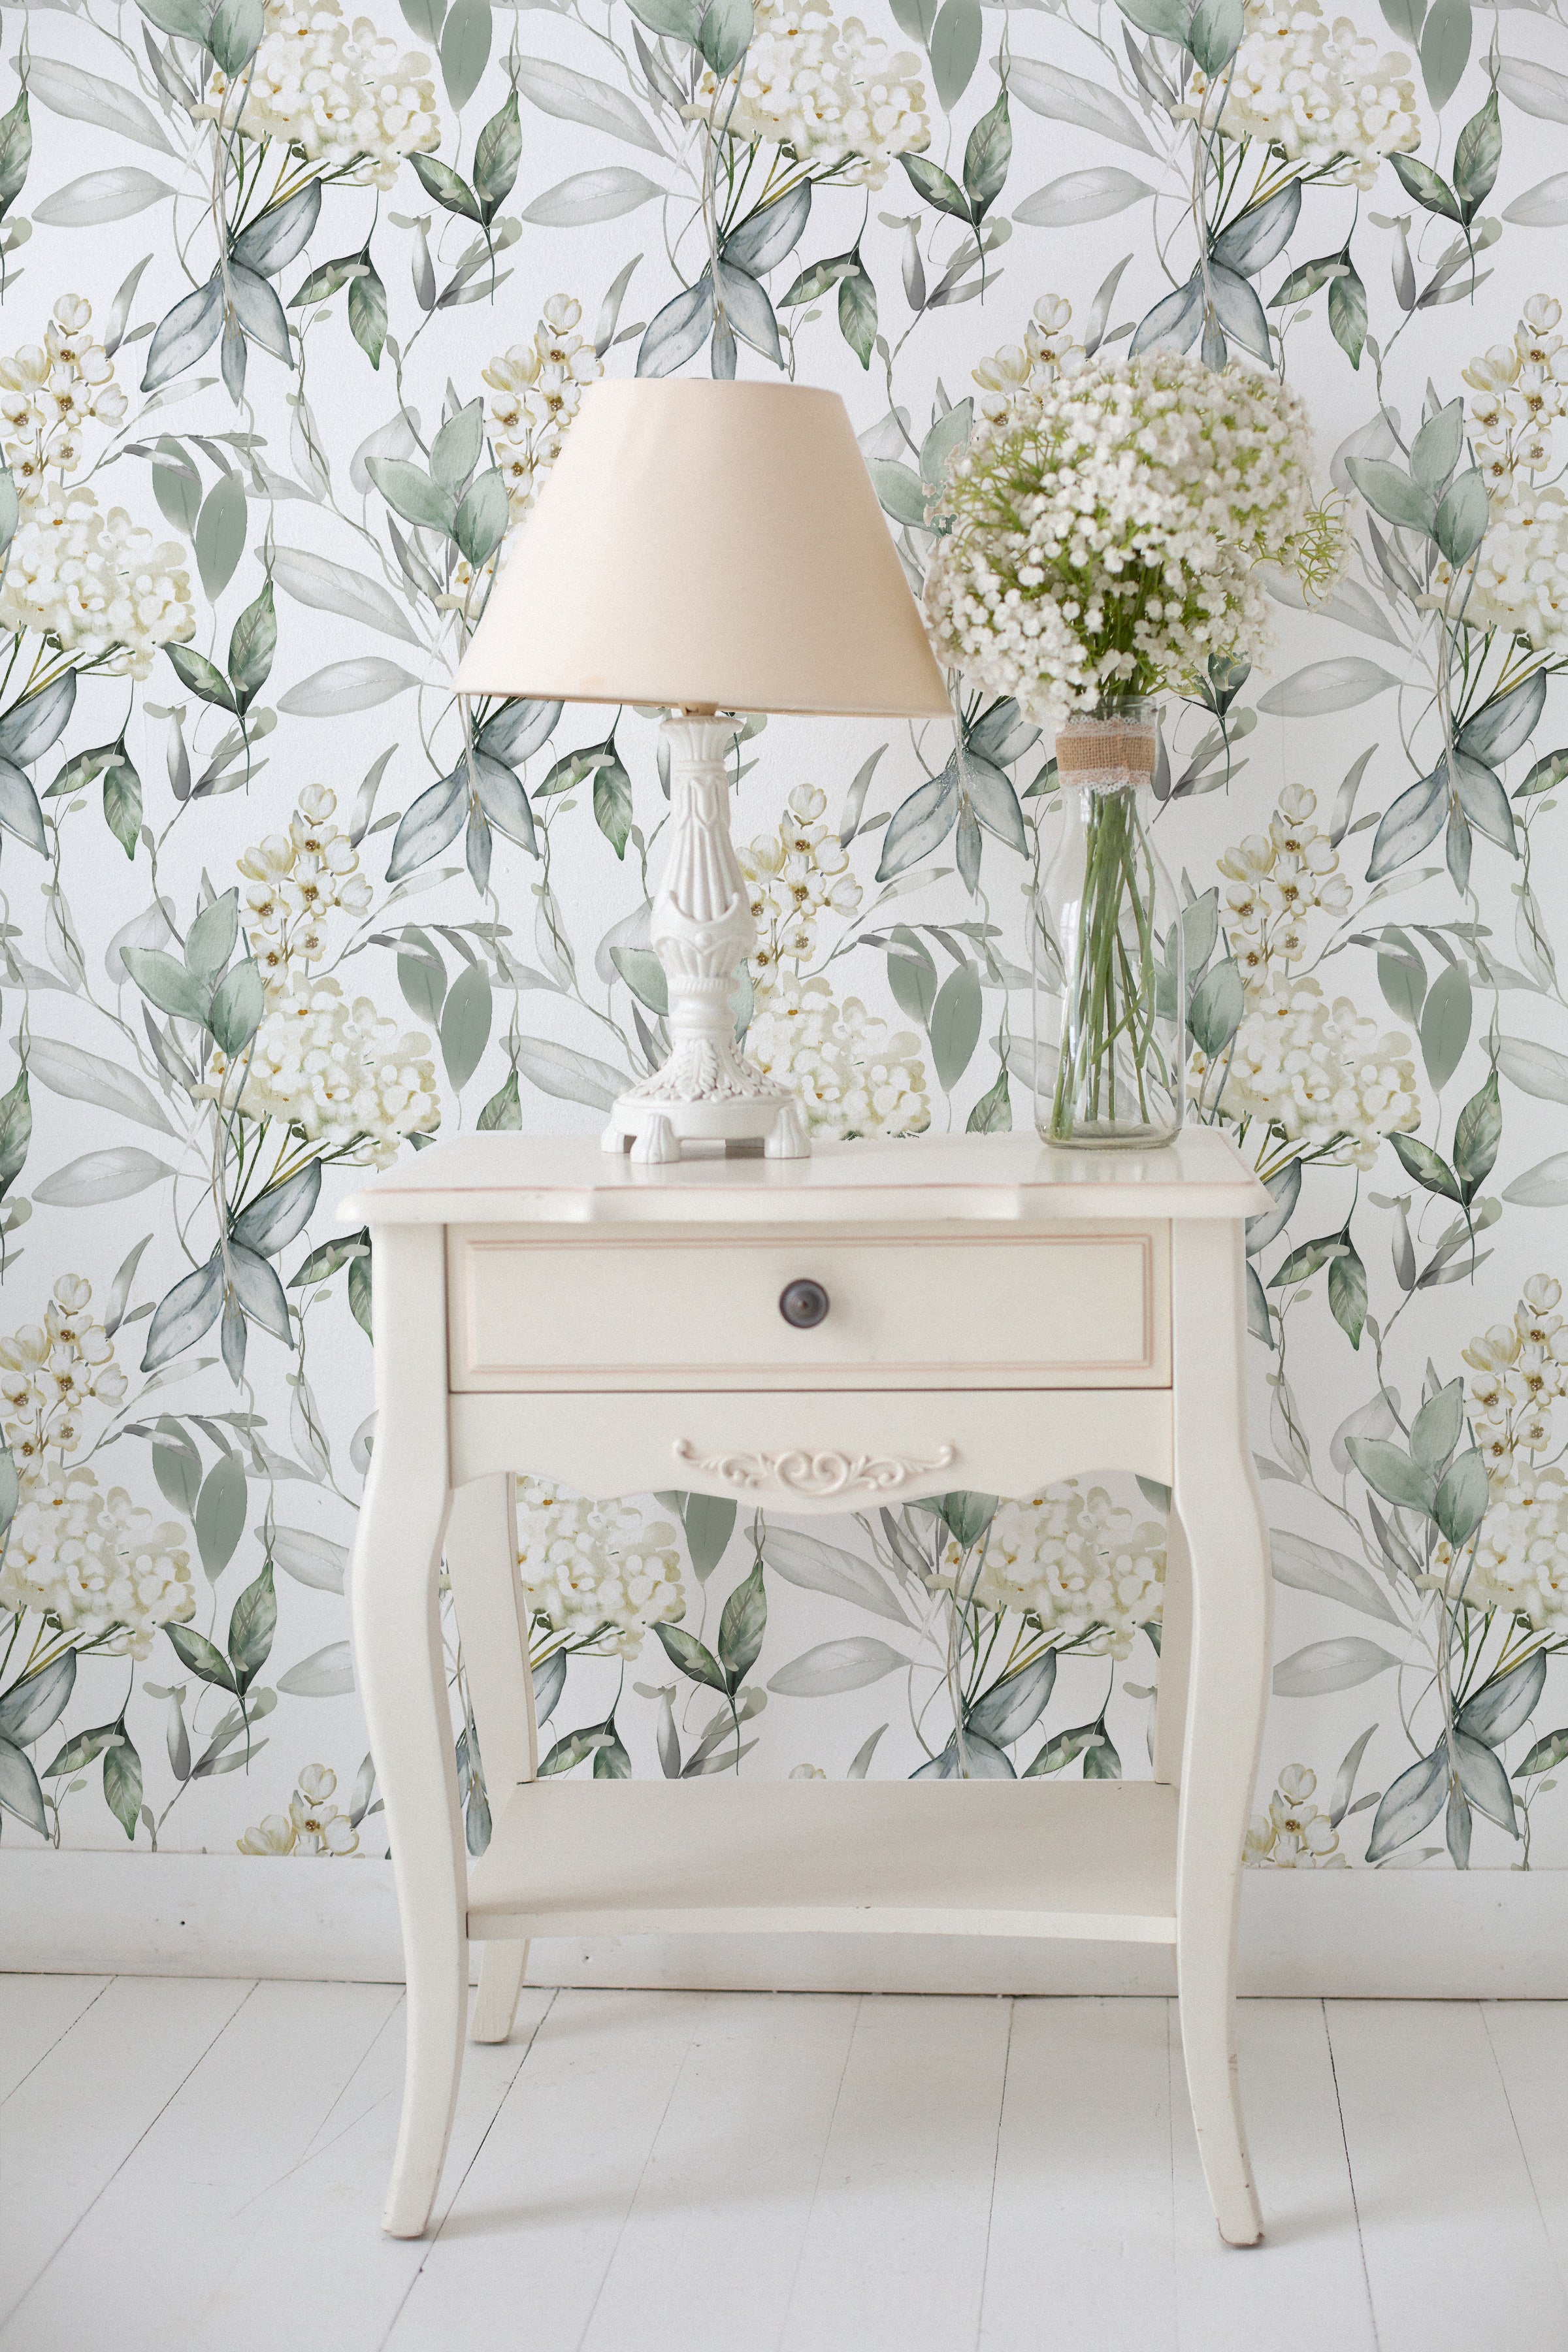 An elegant room corner featuring a white vintage table with a drawer, topped with a white lamp with a beige shade and a clear glass vase filled with white flowers. The background is adorned with Heavenly Hydrangea wallpaper, showcasing a pattern of white hydrangea blooms amid soft green and gray foliage.